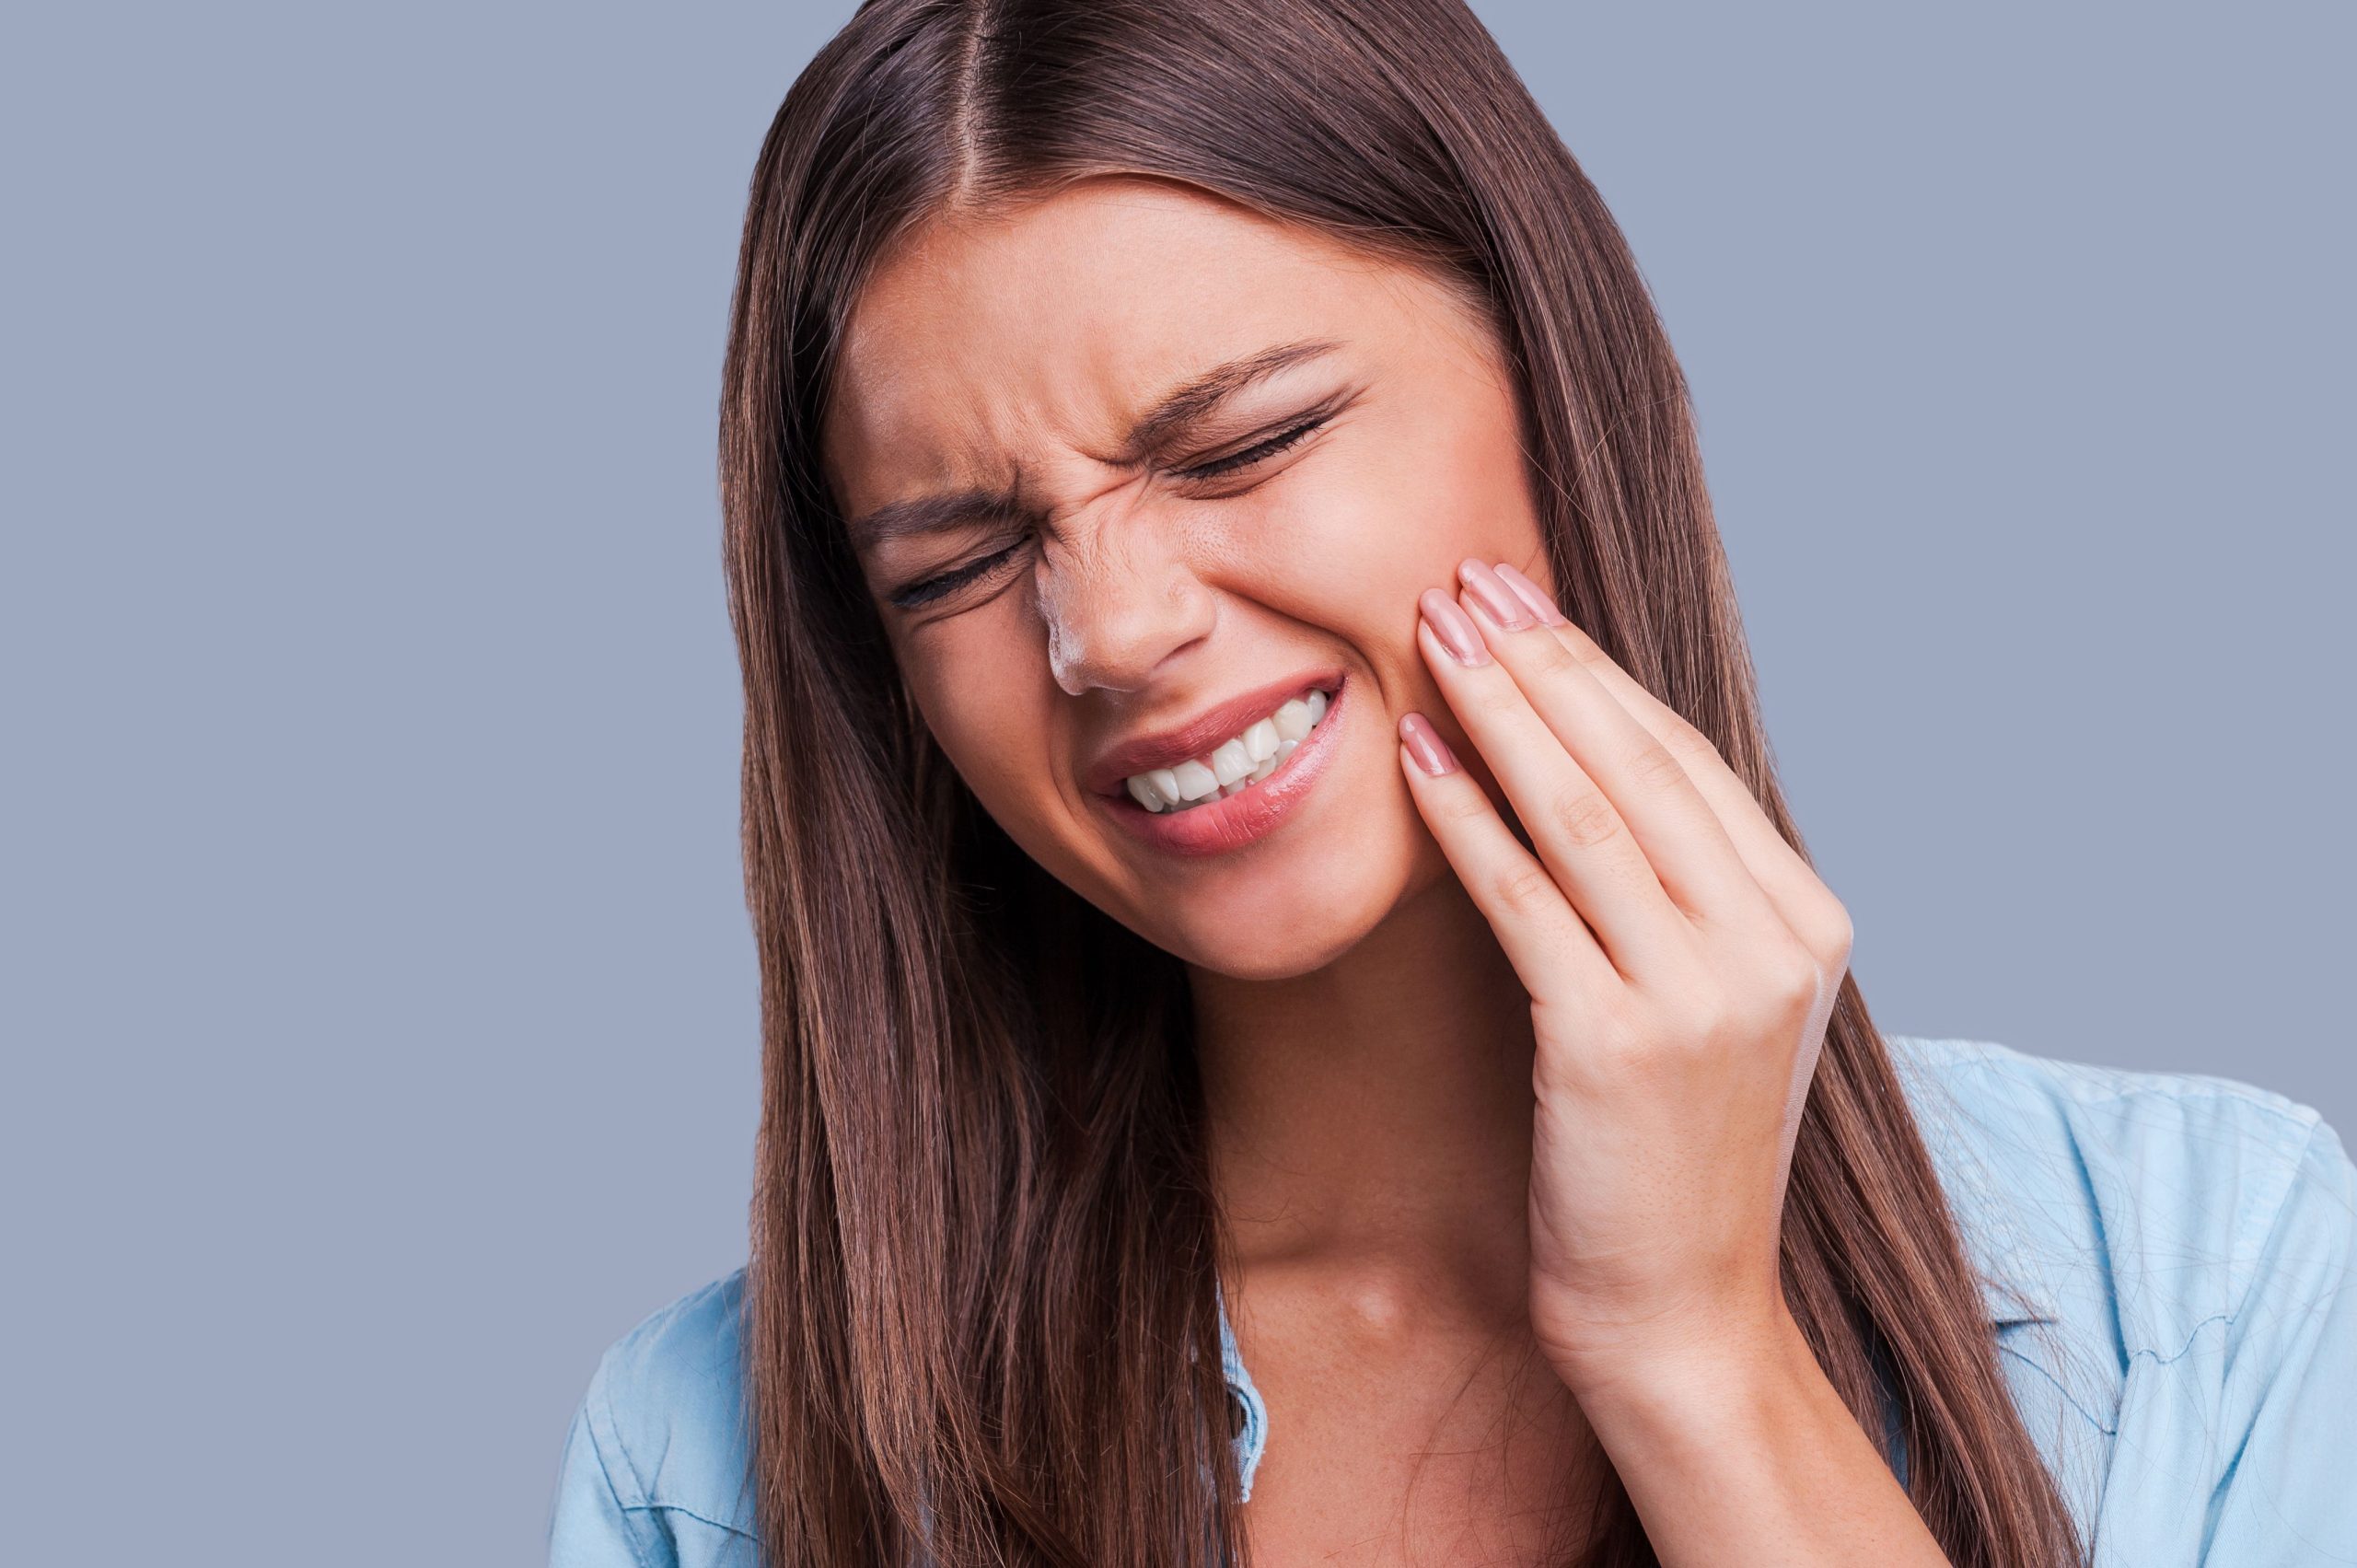 woman suffering oral pain from gum disease